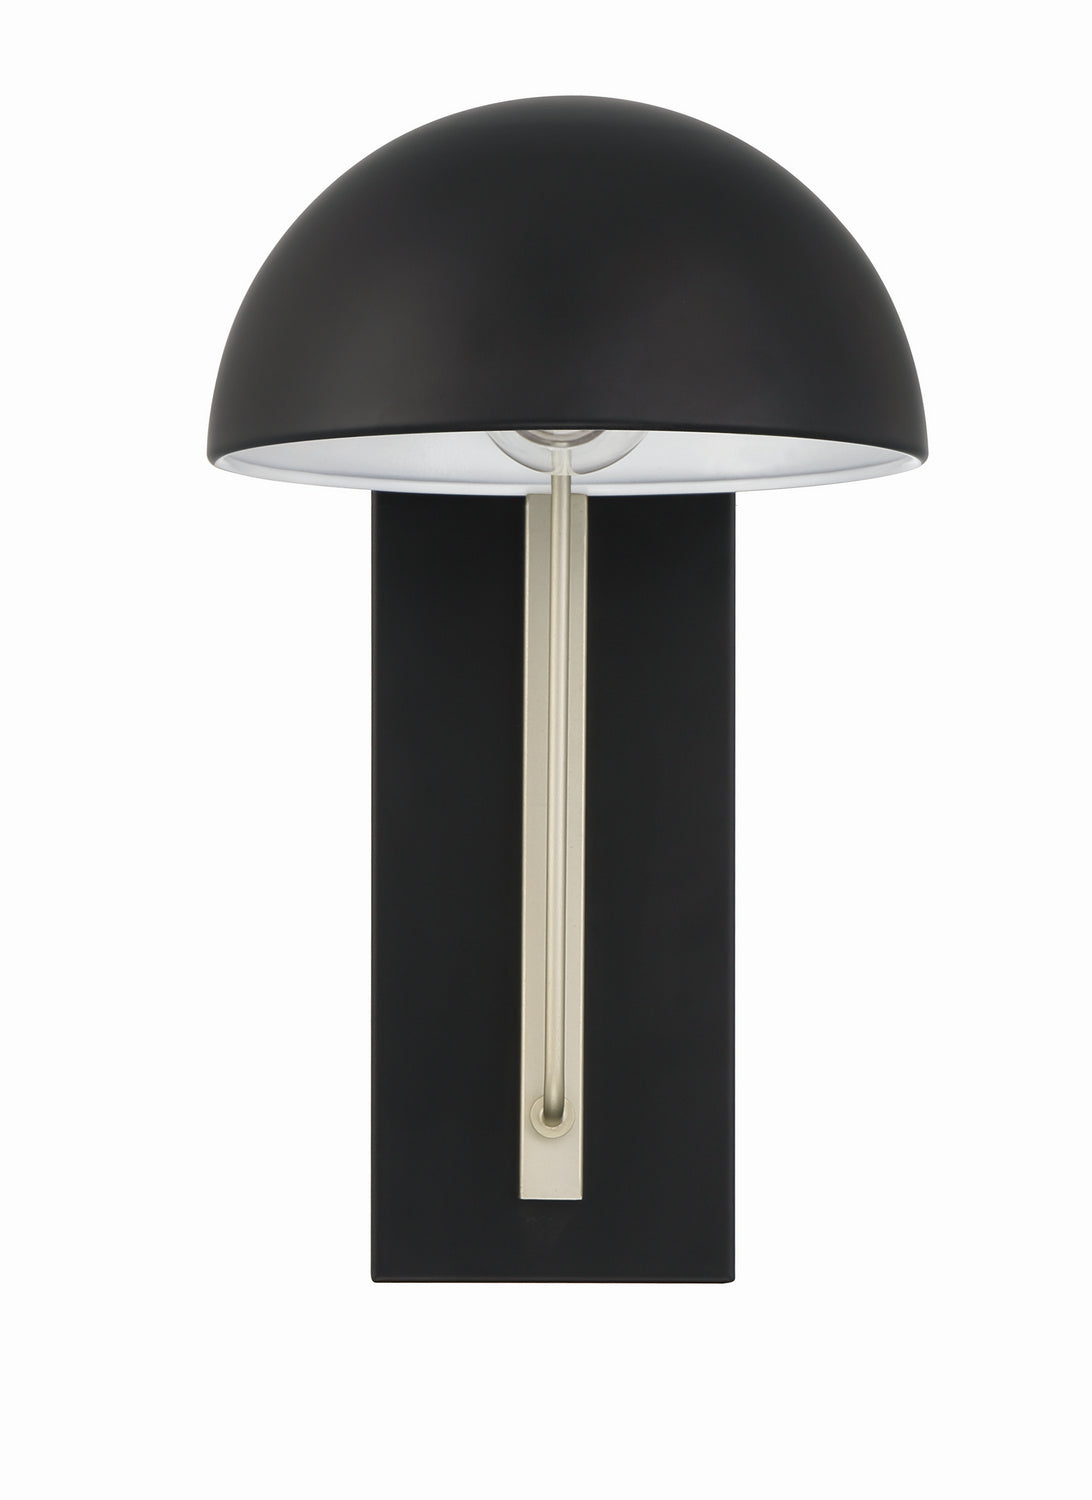 Craftmade One Light Outdoor Wall Mount from the Kahn collection in Midnight/Satin Aluminum finish